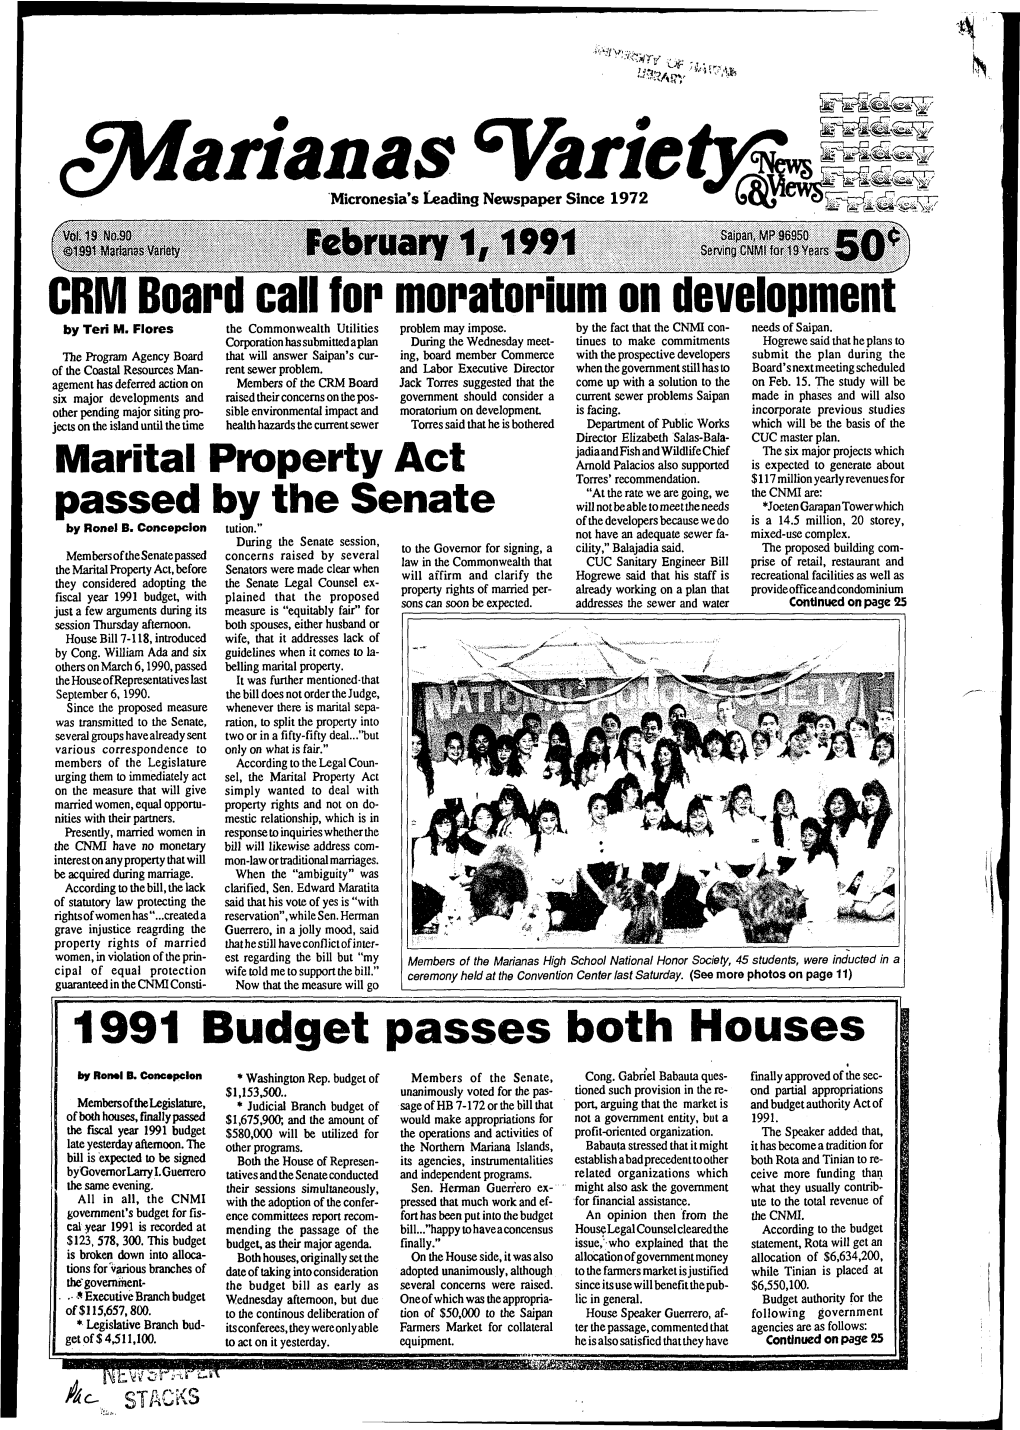 Saipan, MP 96950 ©1991 Marianas Variety February 1,1991 Serving CNMI for 19 Years CRM Board Call for Moratorium on Development by Teri M